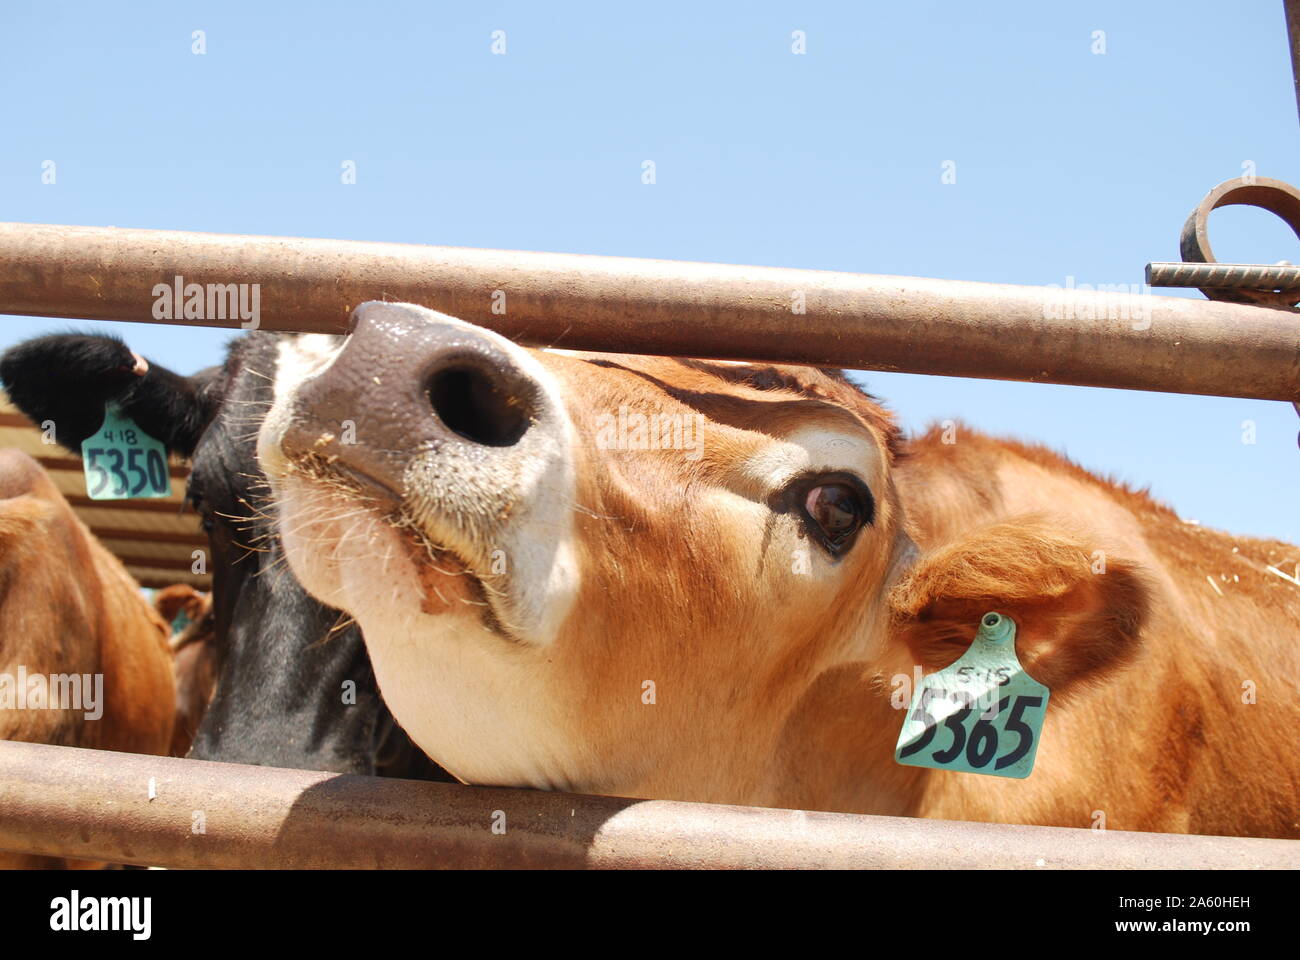 A Jersey cow sticking her head through a fence. Stock Photo